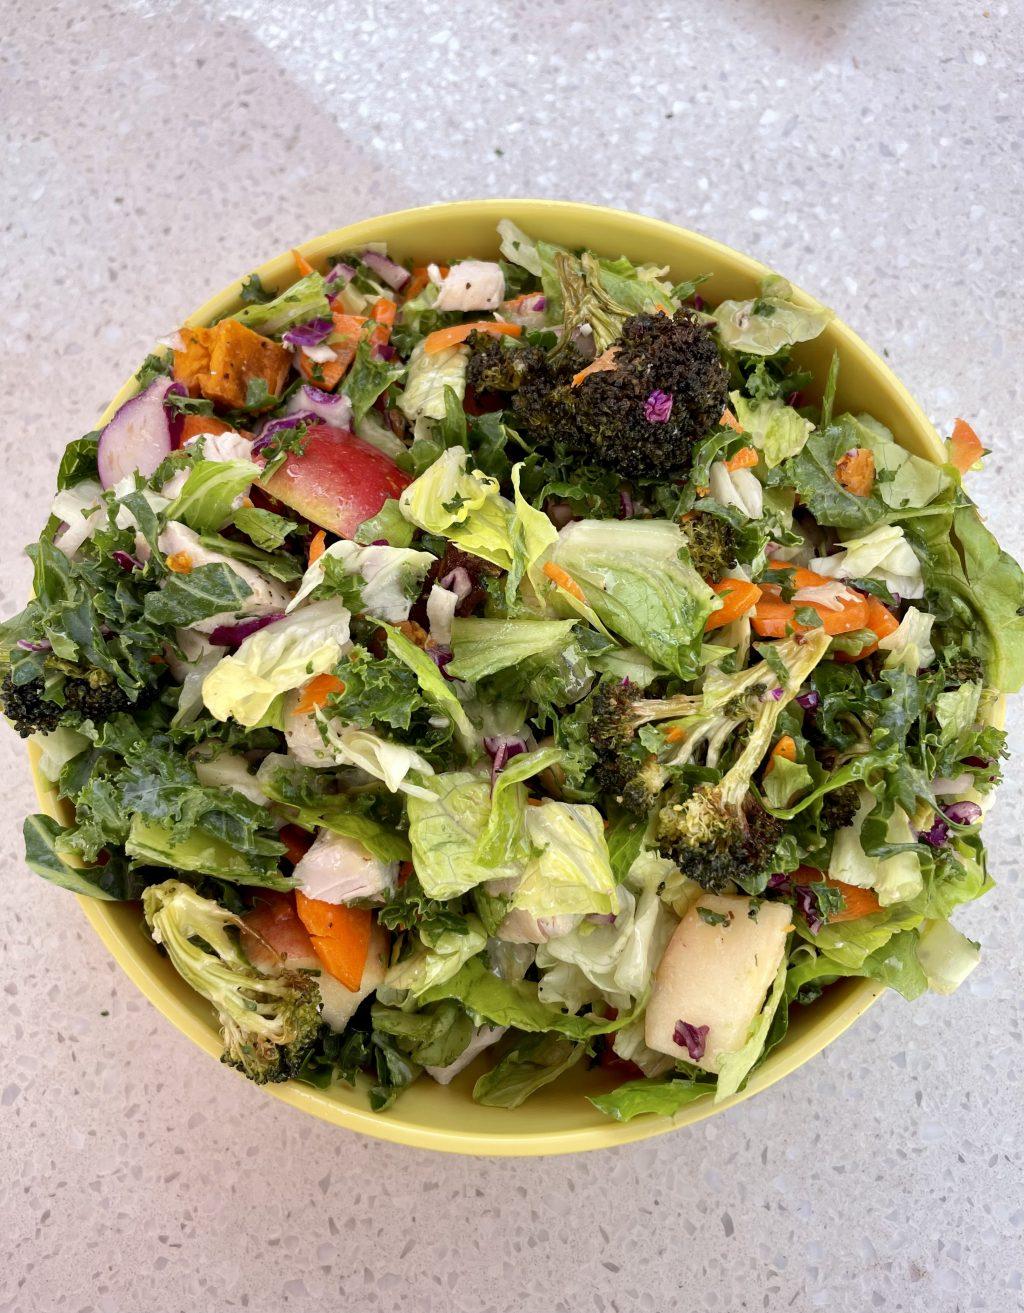 Alfalfa makes it easy to design a unique salad or burrito. This dreamy bowl featured a mix of sweet potato, apples, carrots, roasted broccoli, red cabbage and champagne vinaigrette dressing.